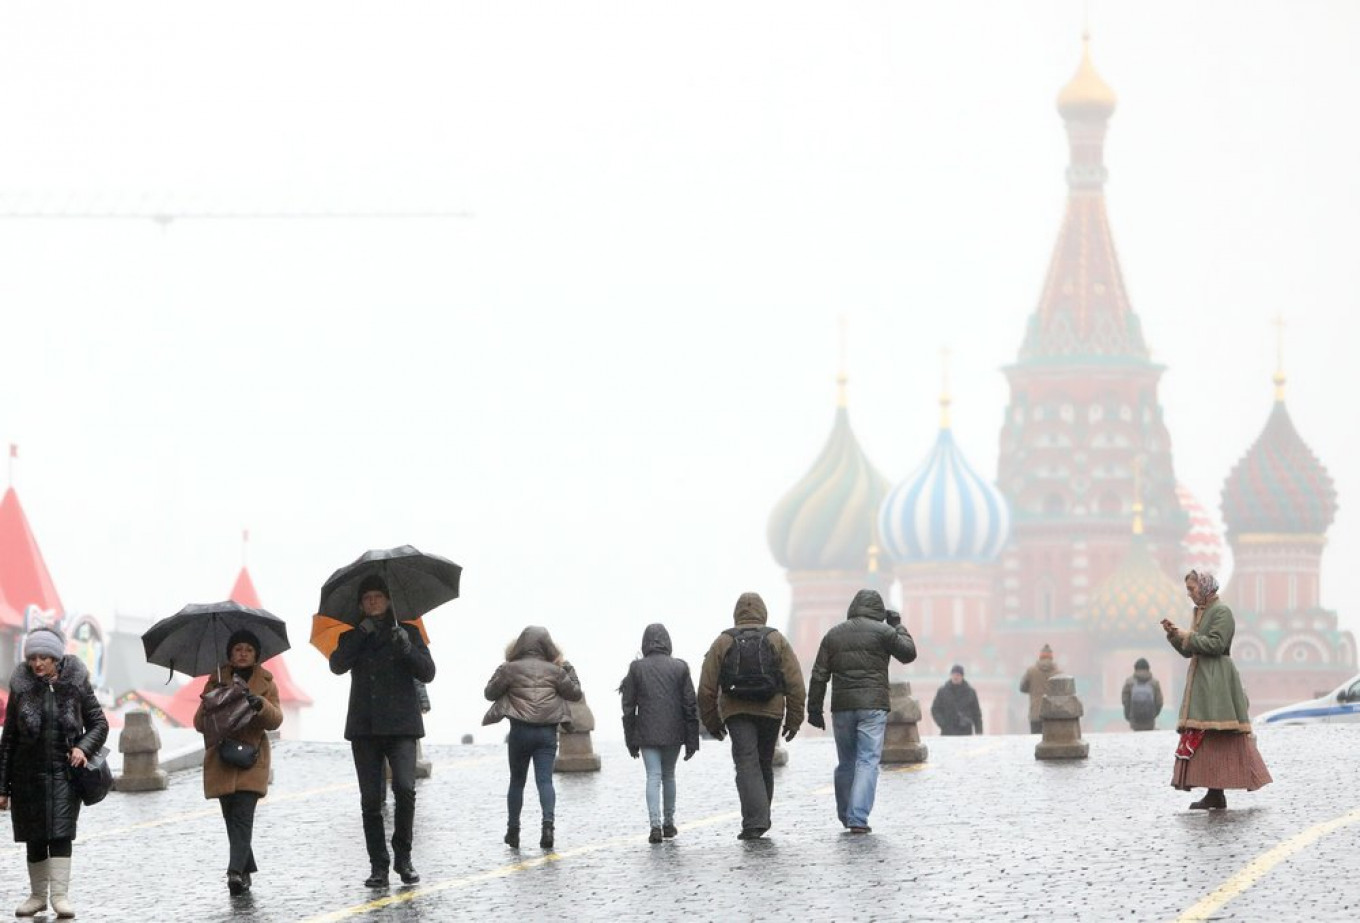 Russia Temporarily Bans Entry of Foreigners Amid Coronavirus Outbreak